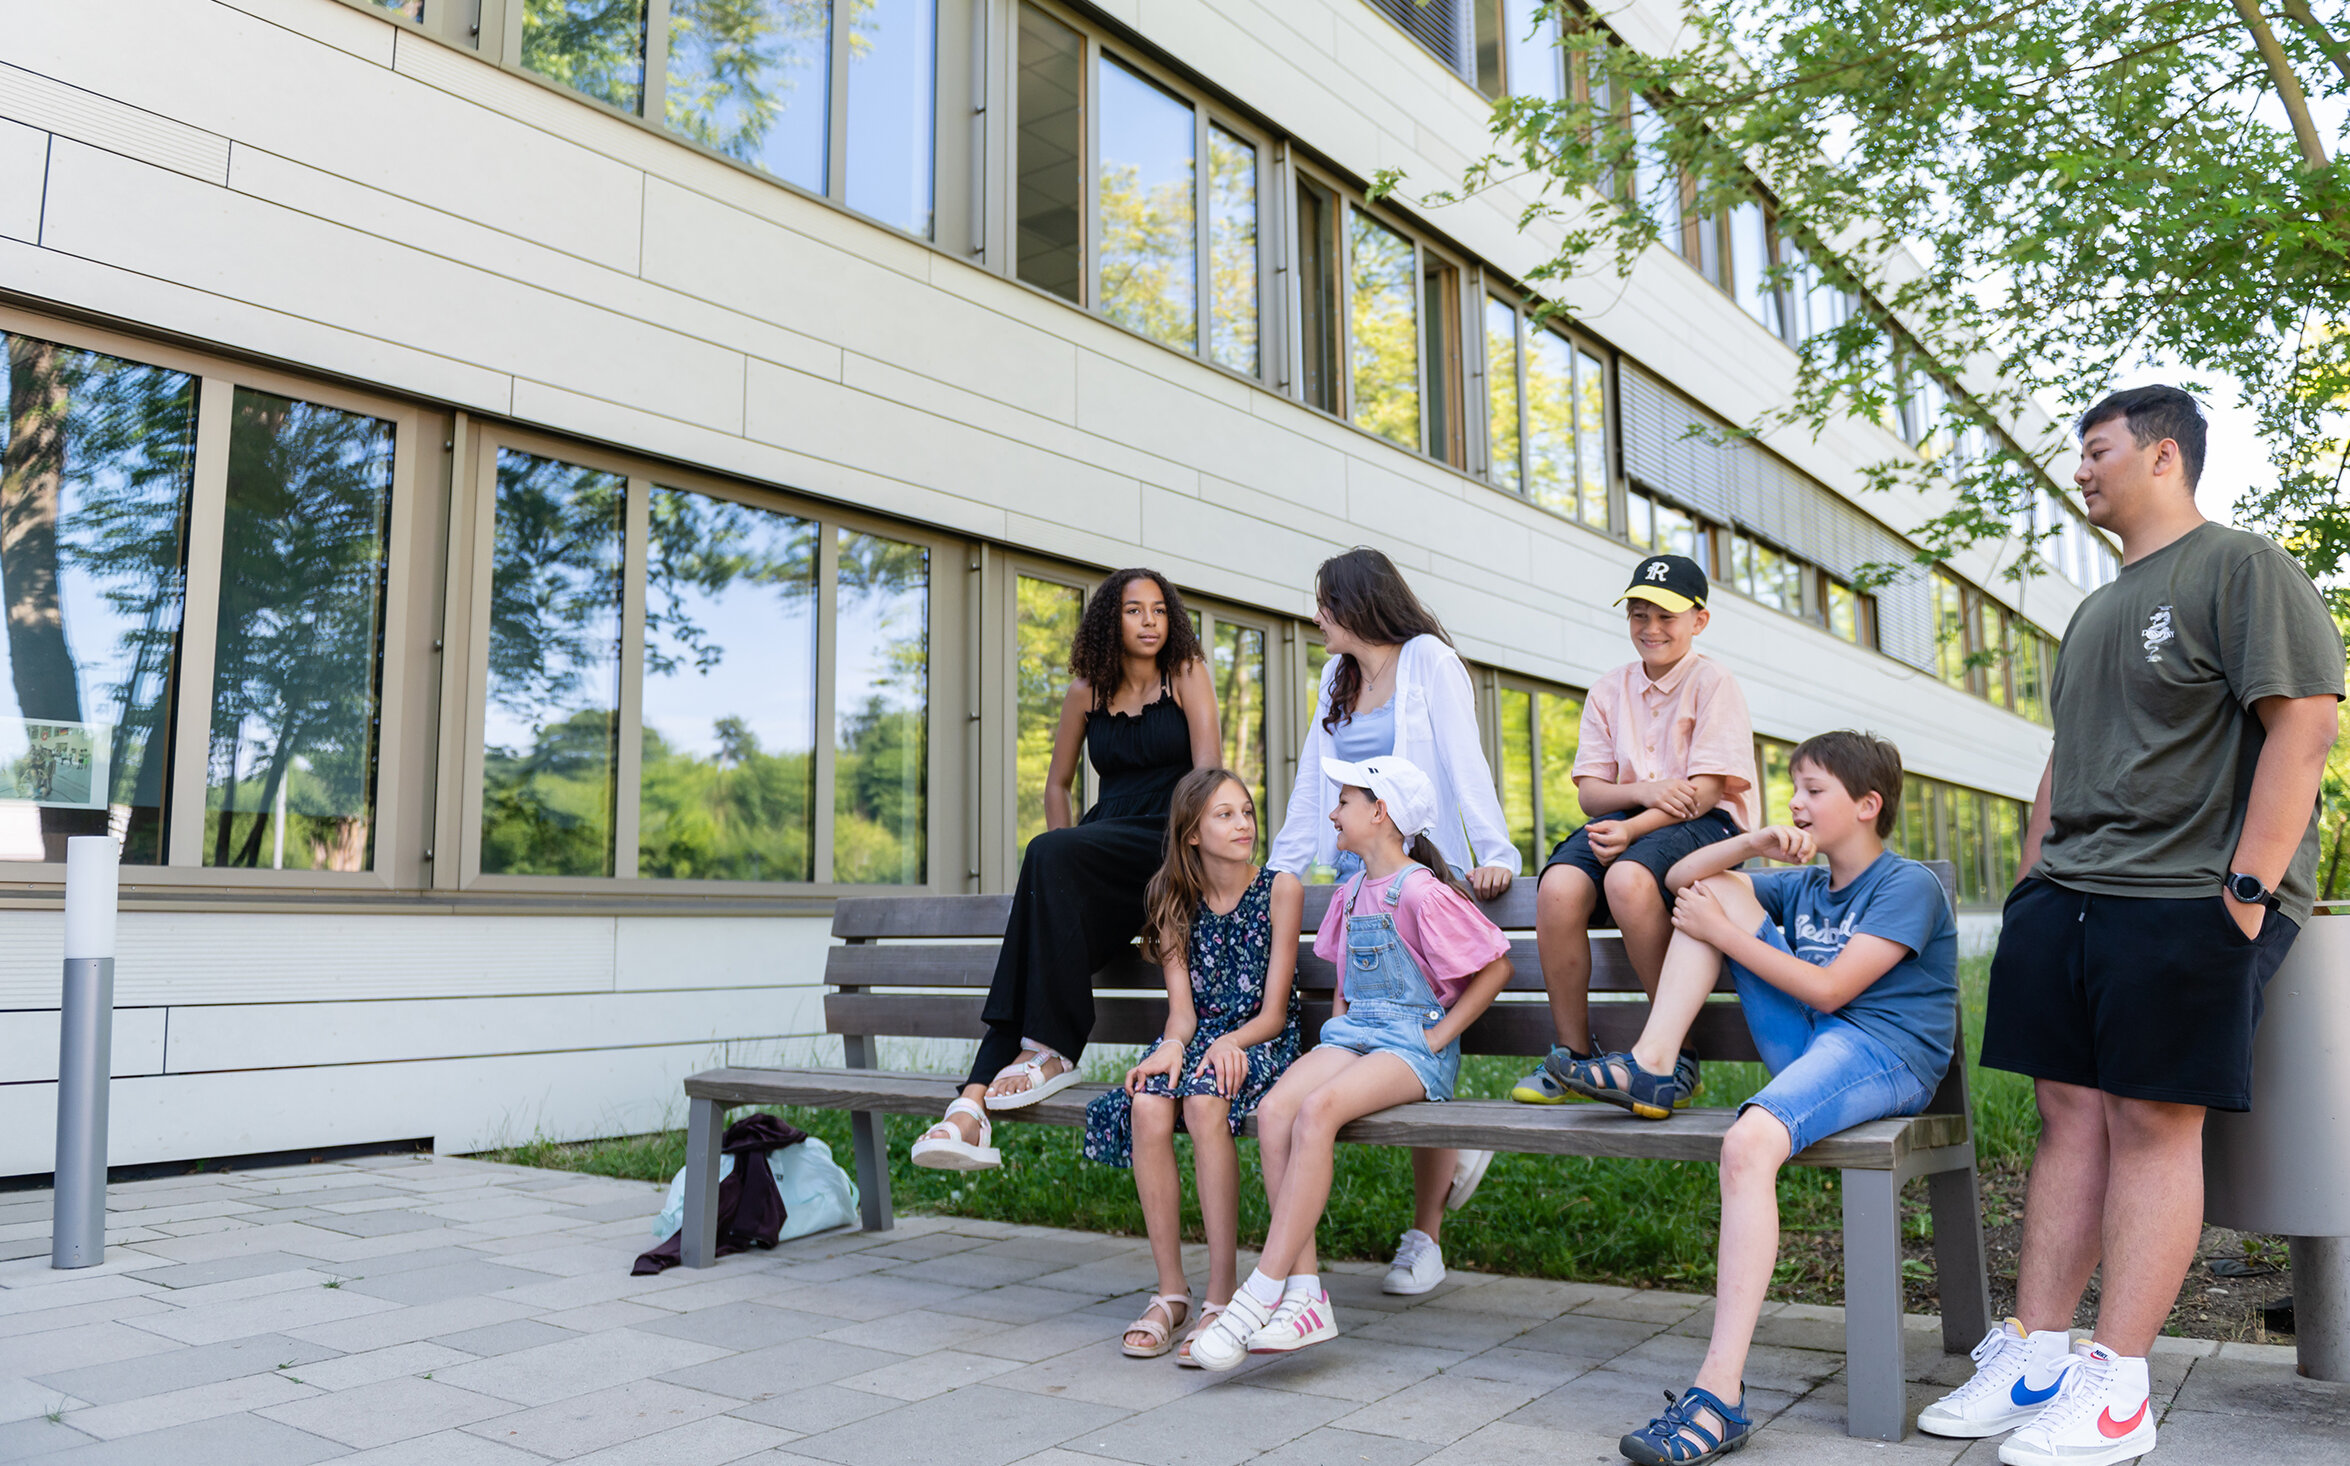 Students of different ages sit on a bench in front of the school building.